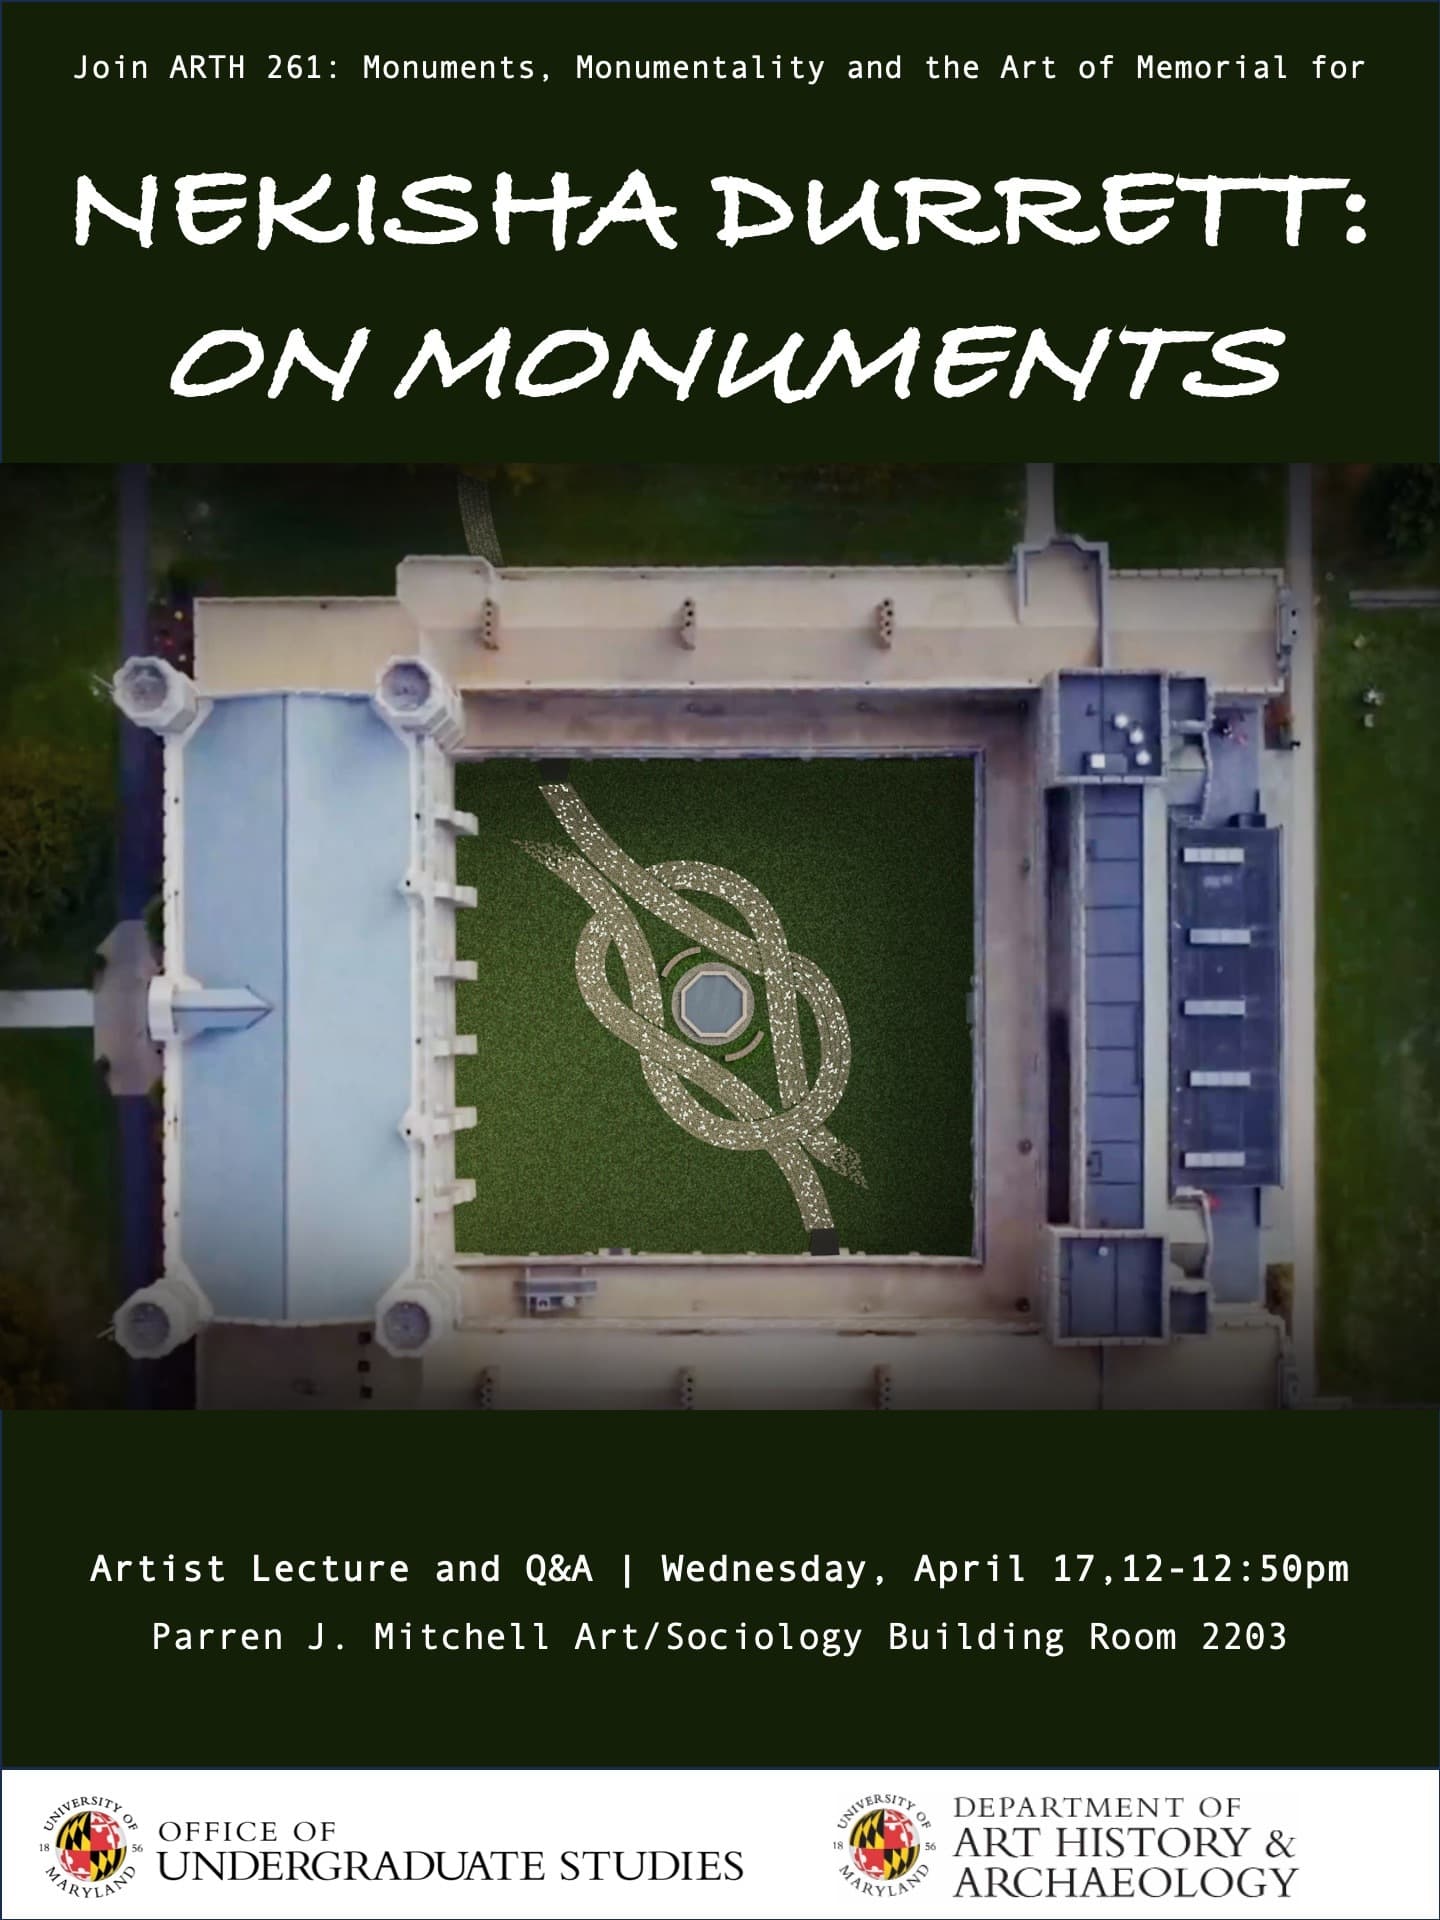 poster with aerial view of sculpture